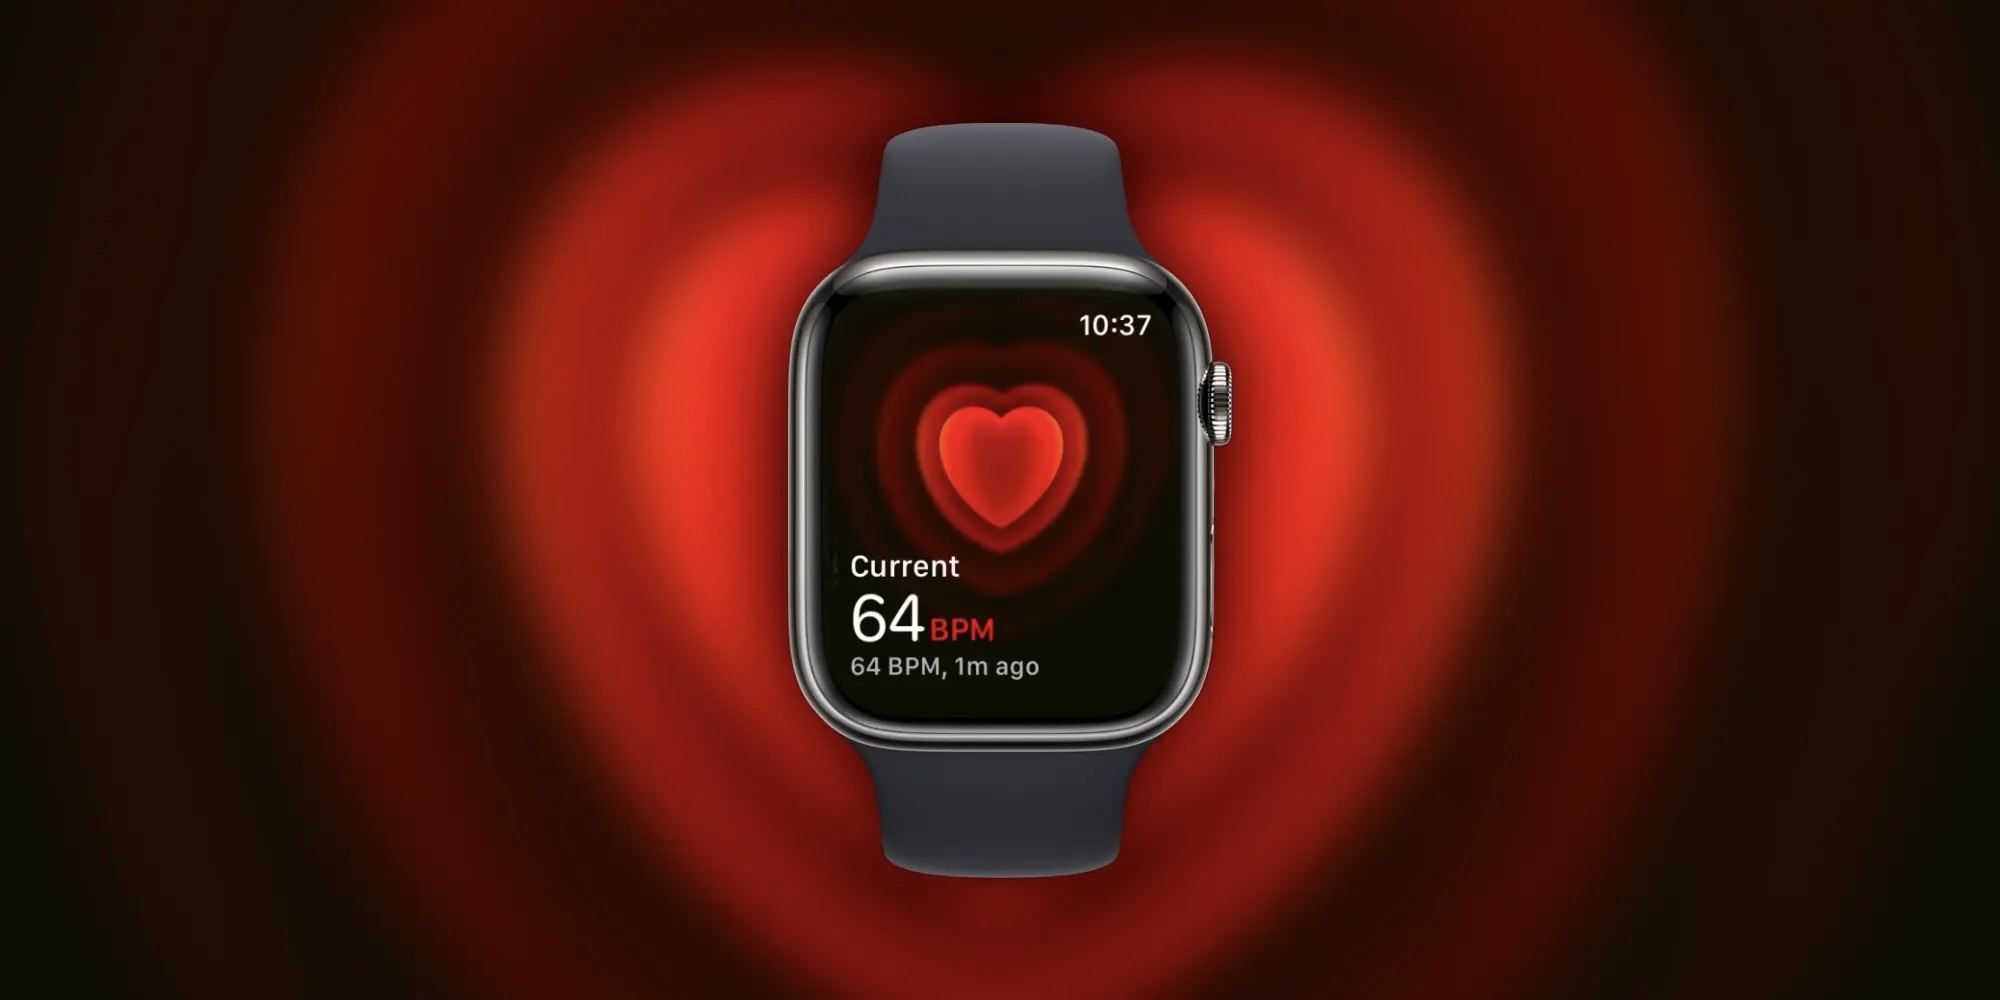 Apple to remove pulse oximeter from watches to avoid sales ban - CBS News